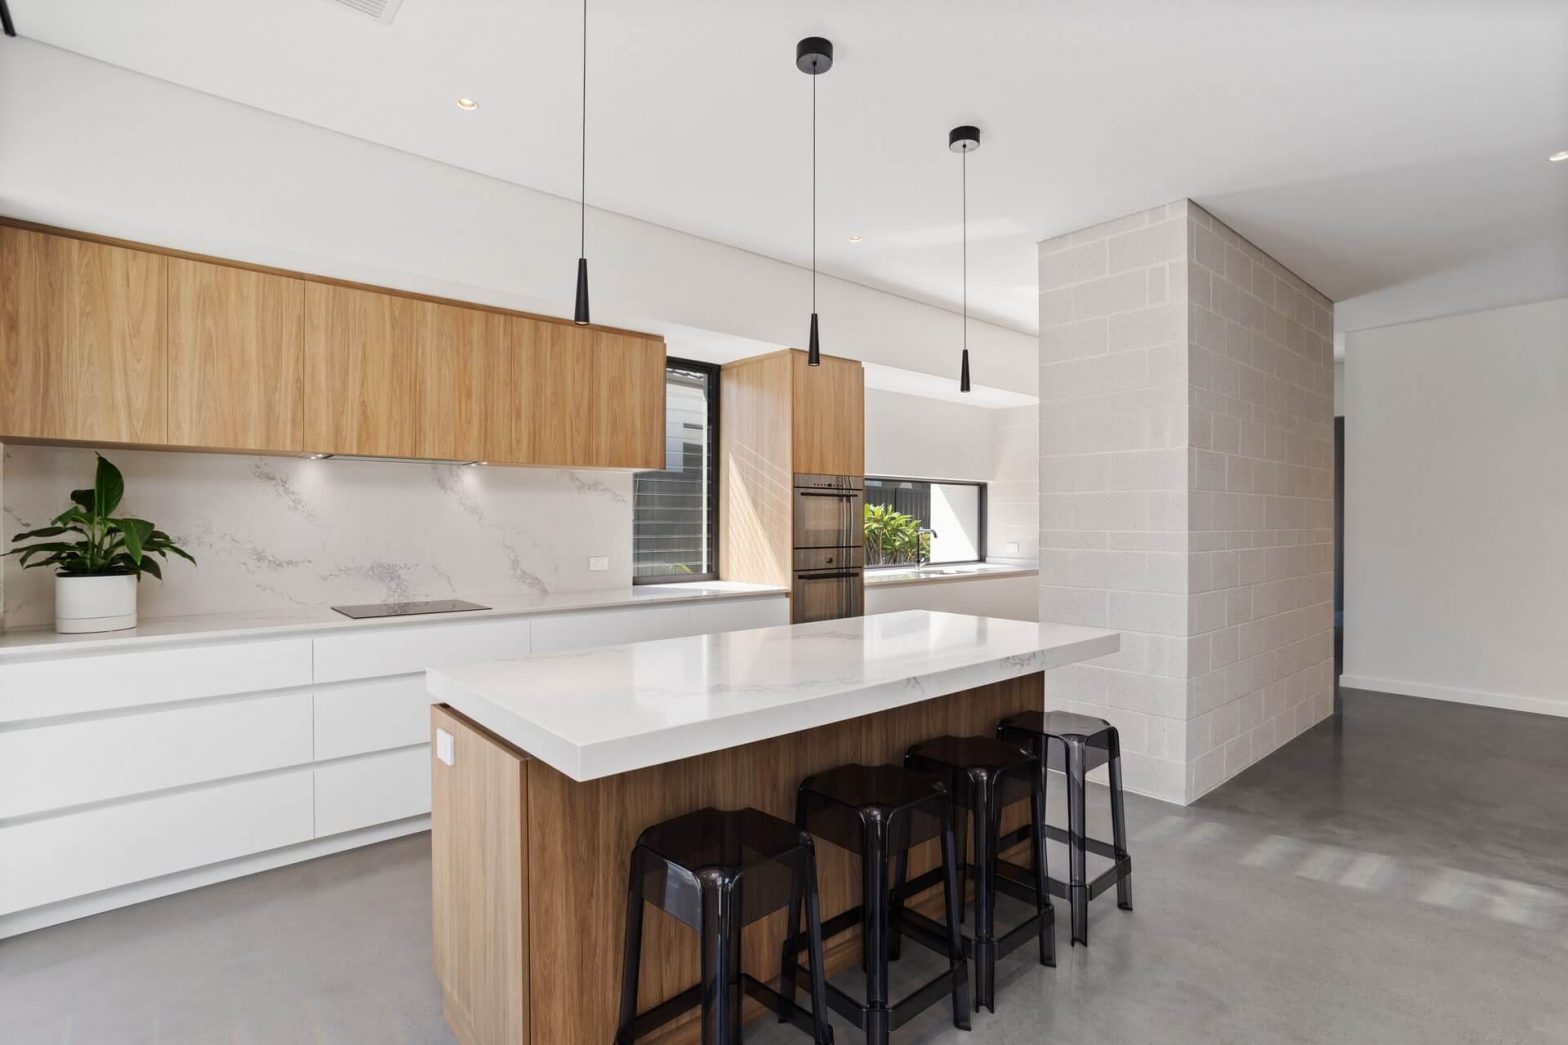 5 BEAUTIFUL Minimalistic Kitchen Designs to MAX your space